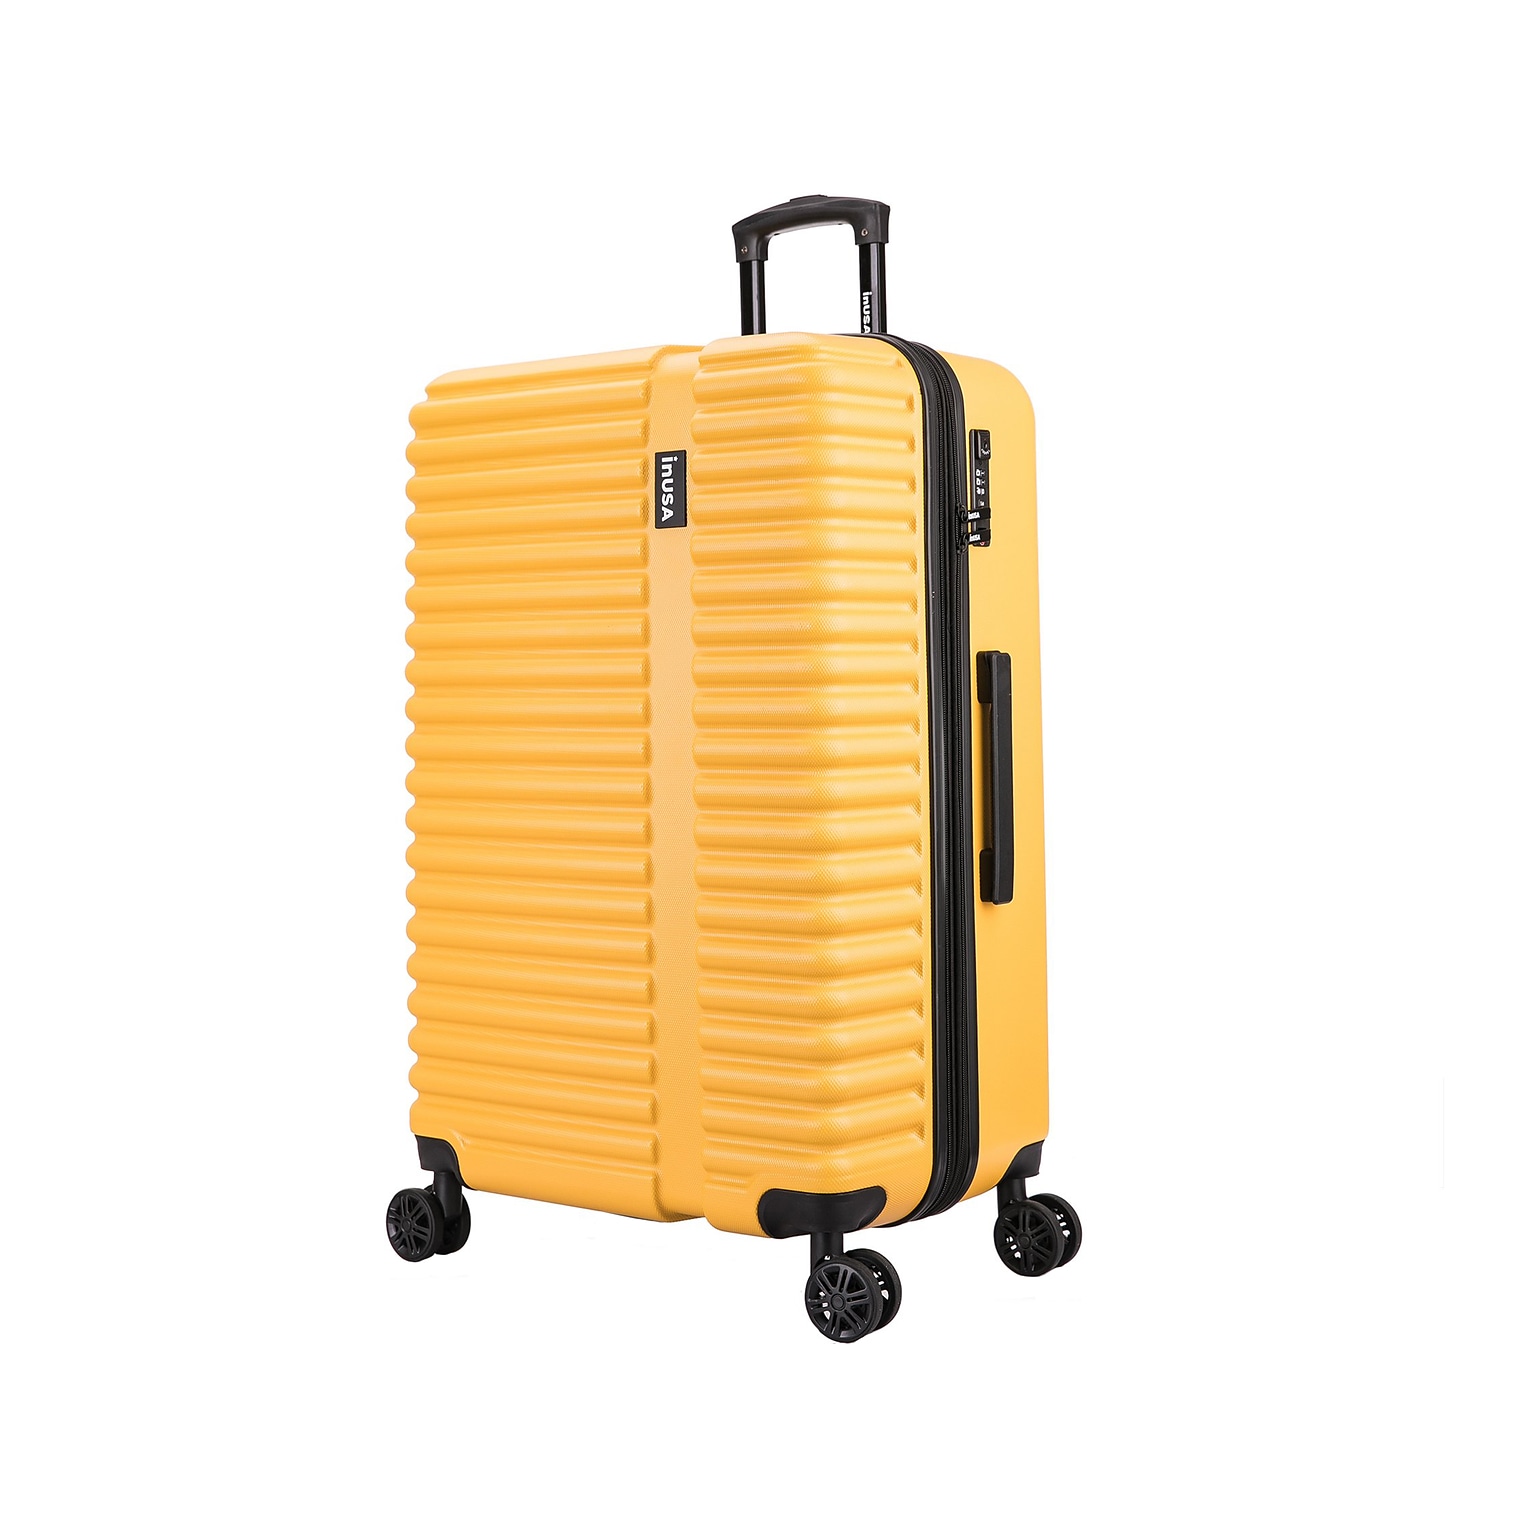 InUSA Ally 27.17 Hardside Suitcase, 4-Wheeled Spinner, TSA Checkpoint Friendly, Mustard (IUALL00L-MUS)